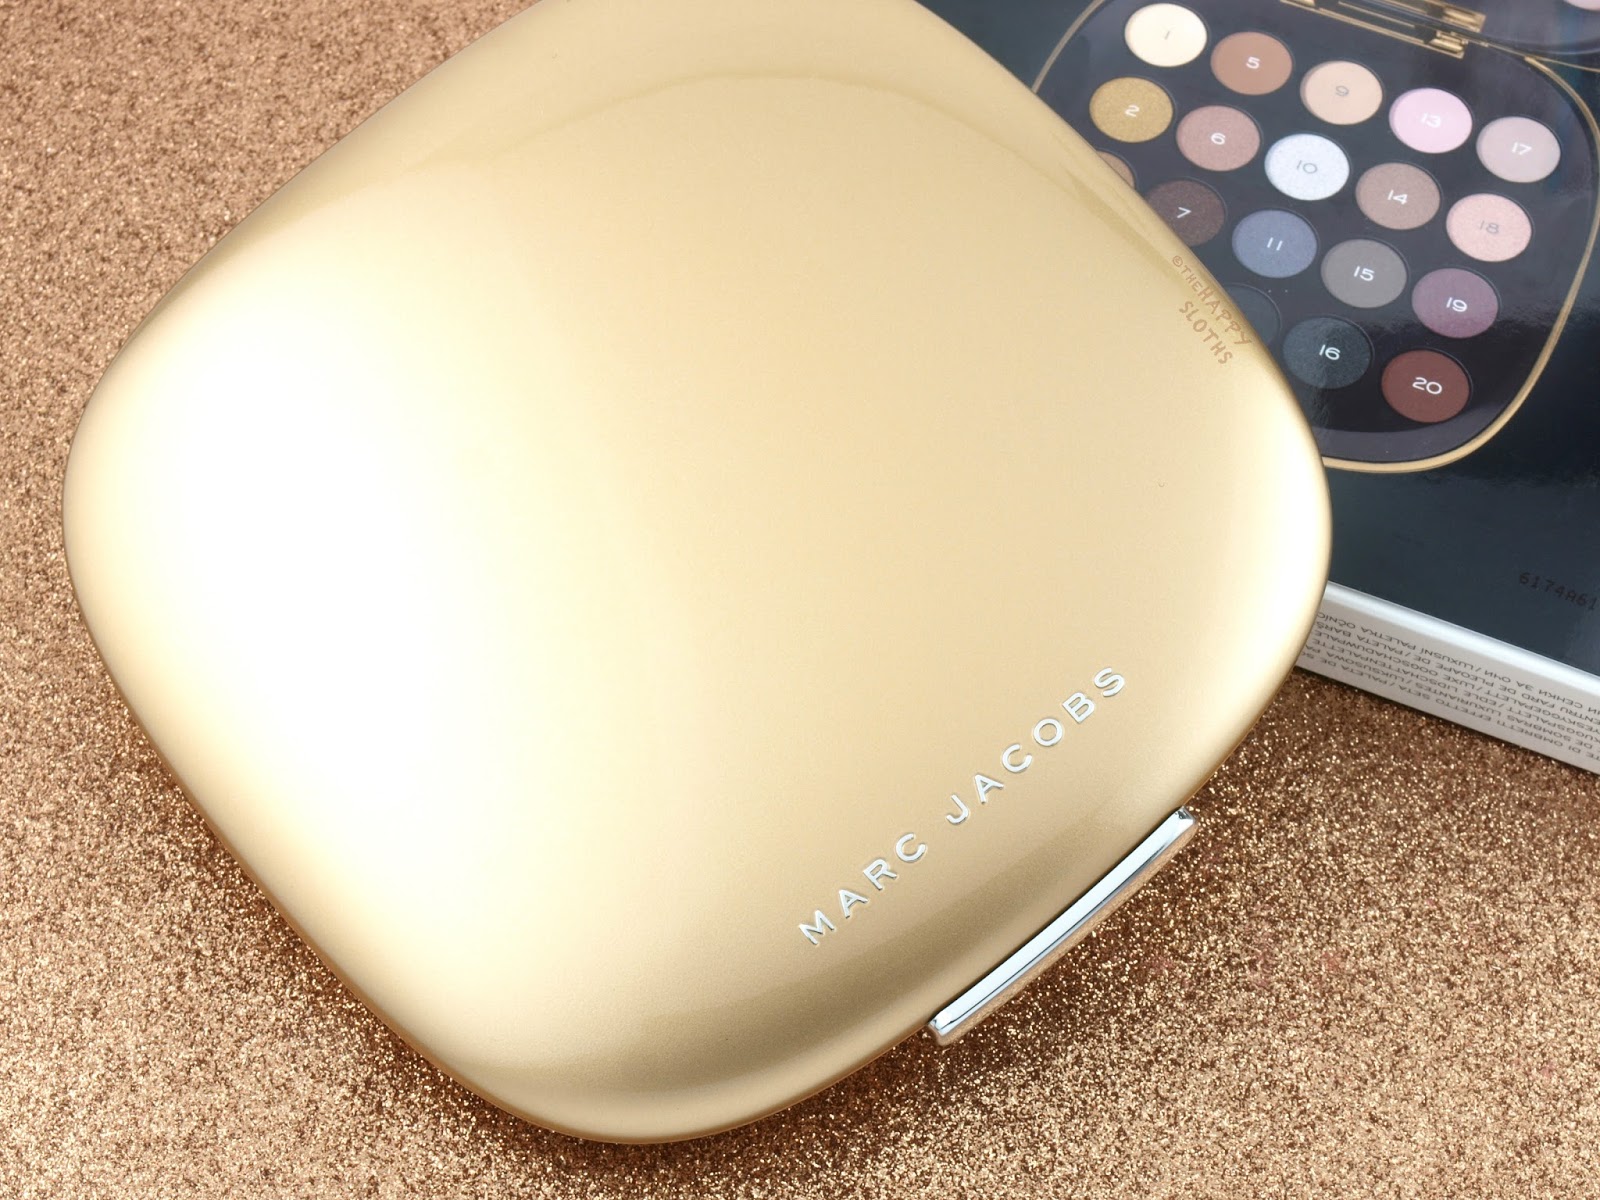 Marc Jacobs About Last Night Style Eye Con No 20 Eyeshadow Palette: Review and Swatches